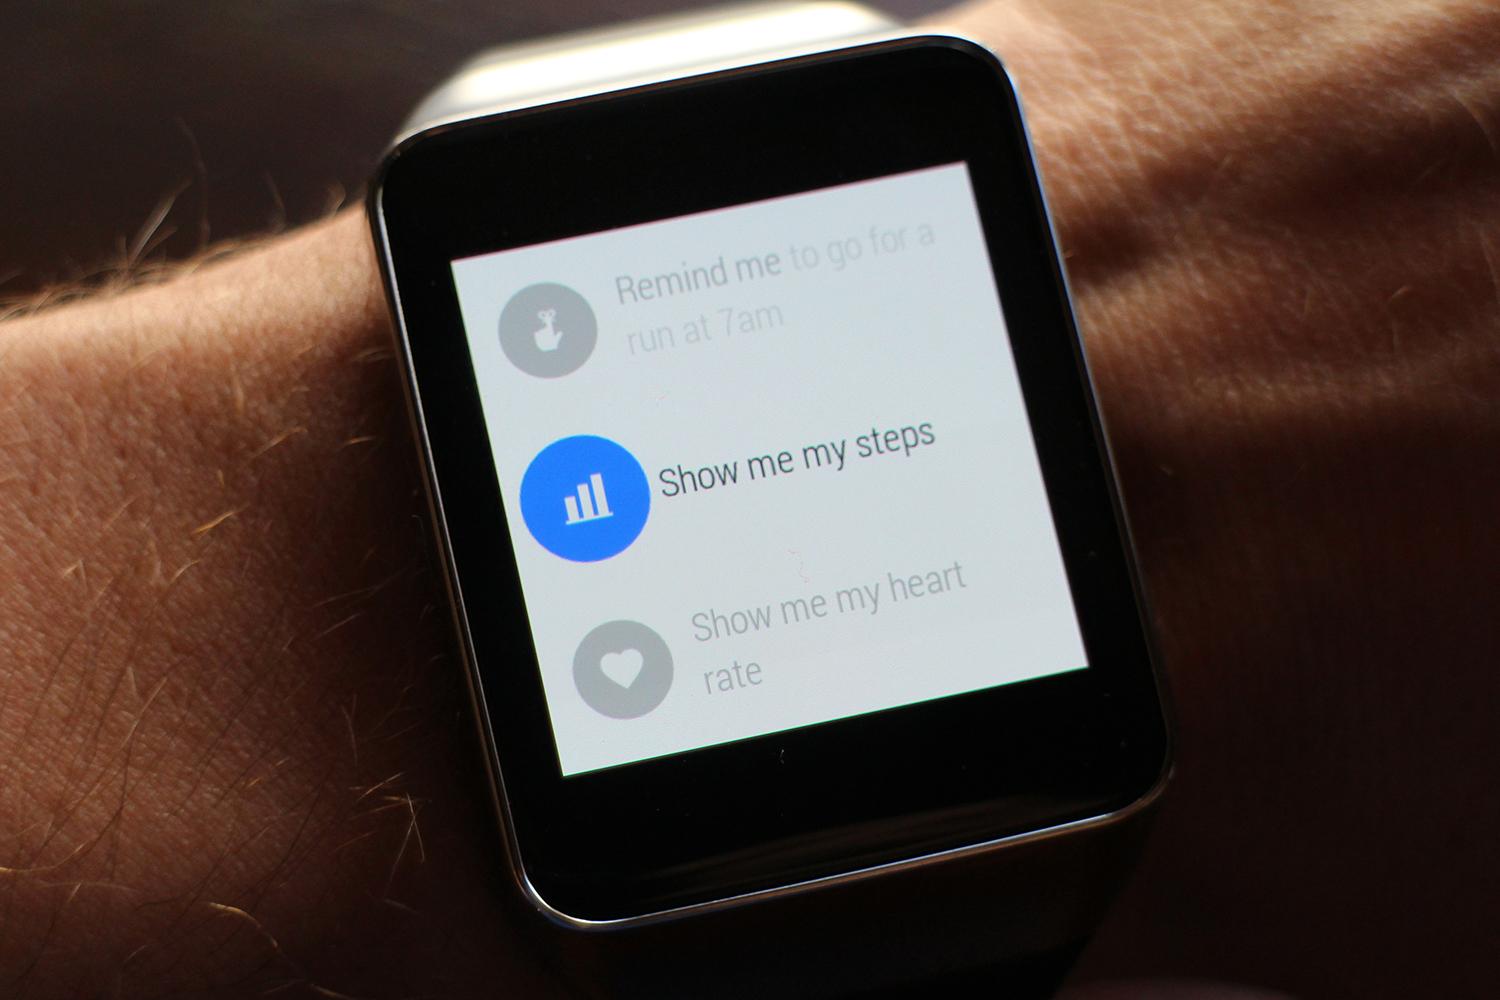 Android Wear hands on